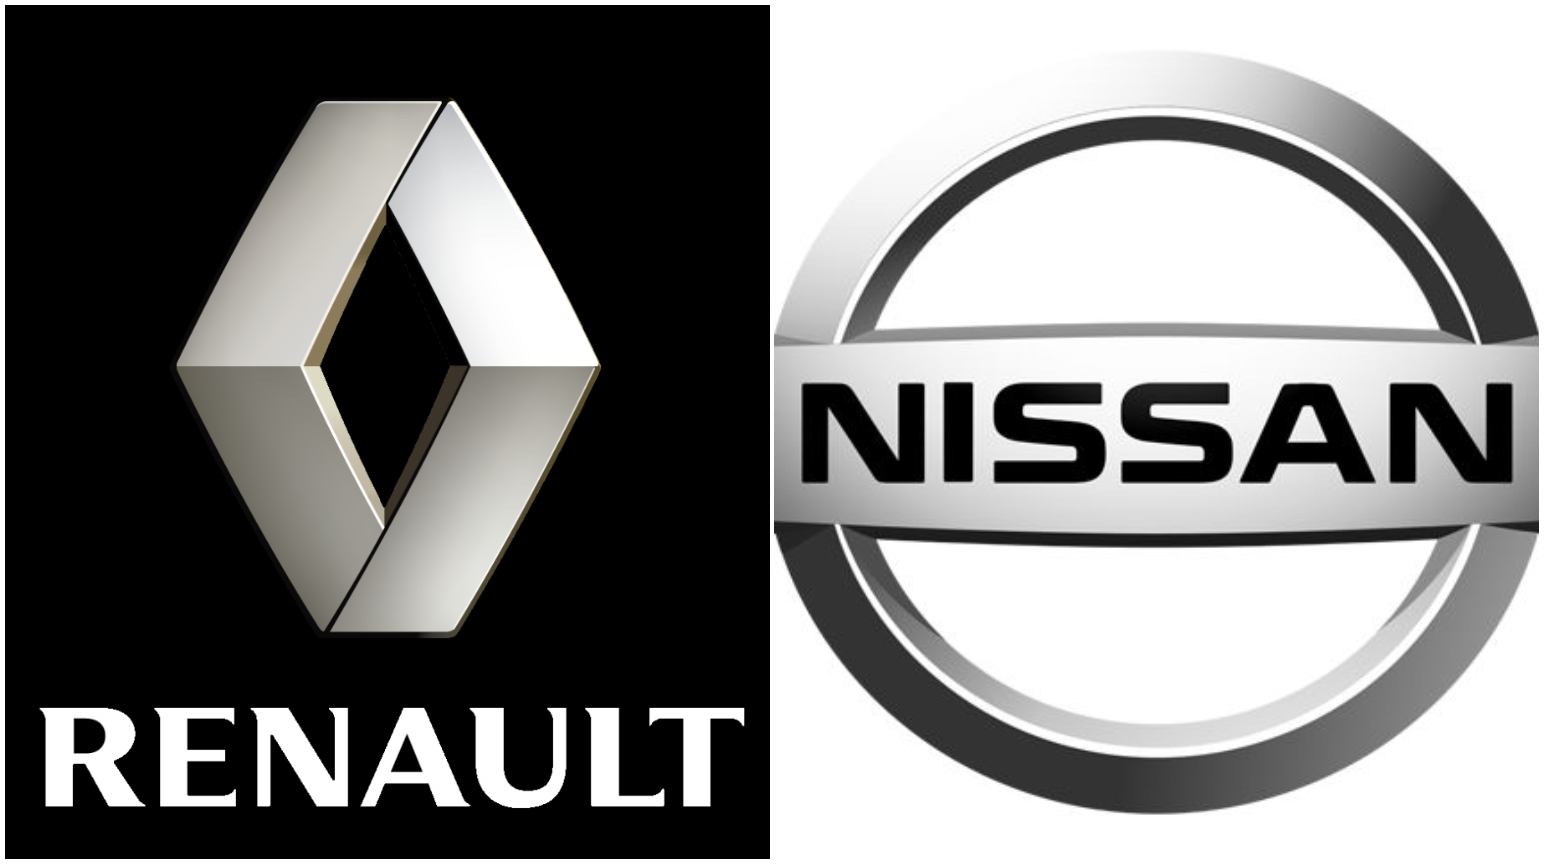 Nissan Motor Co's discussions with Renault SA are centered on optimizing their investment in electric vehicles